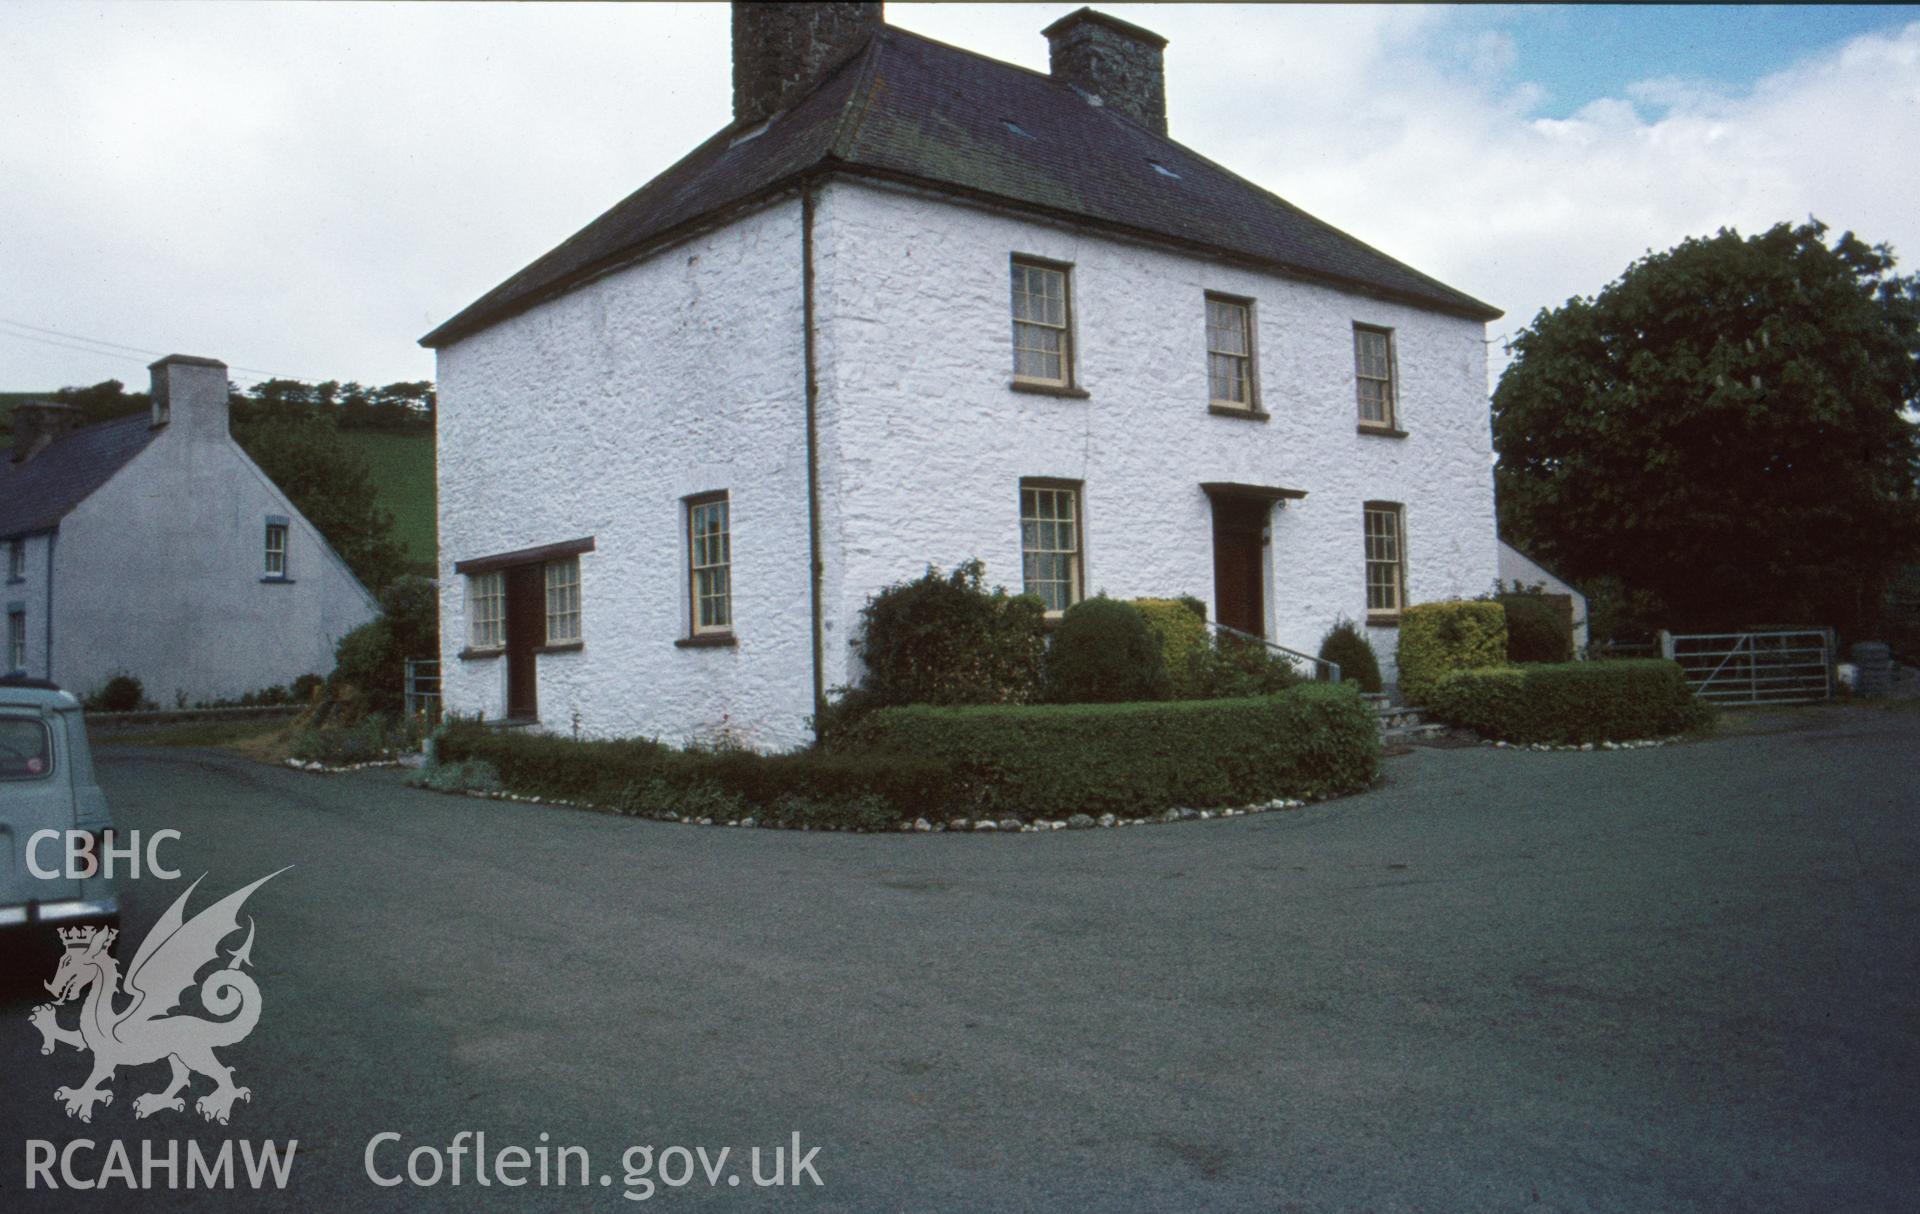 Digital copy of a view of Lisburne House, Llanfihangel y Creuddyn, from the Vernon Hughes Collection.